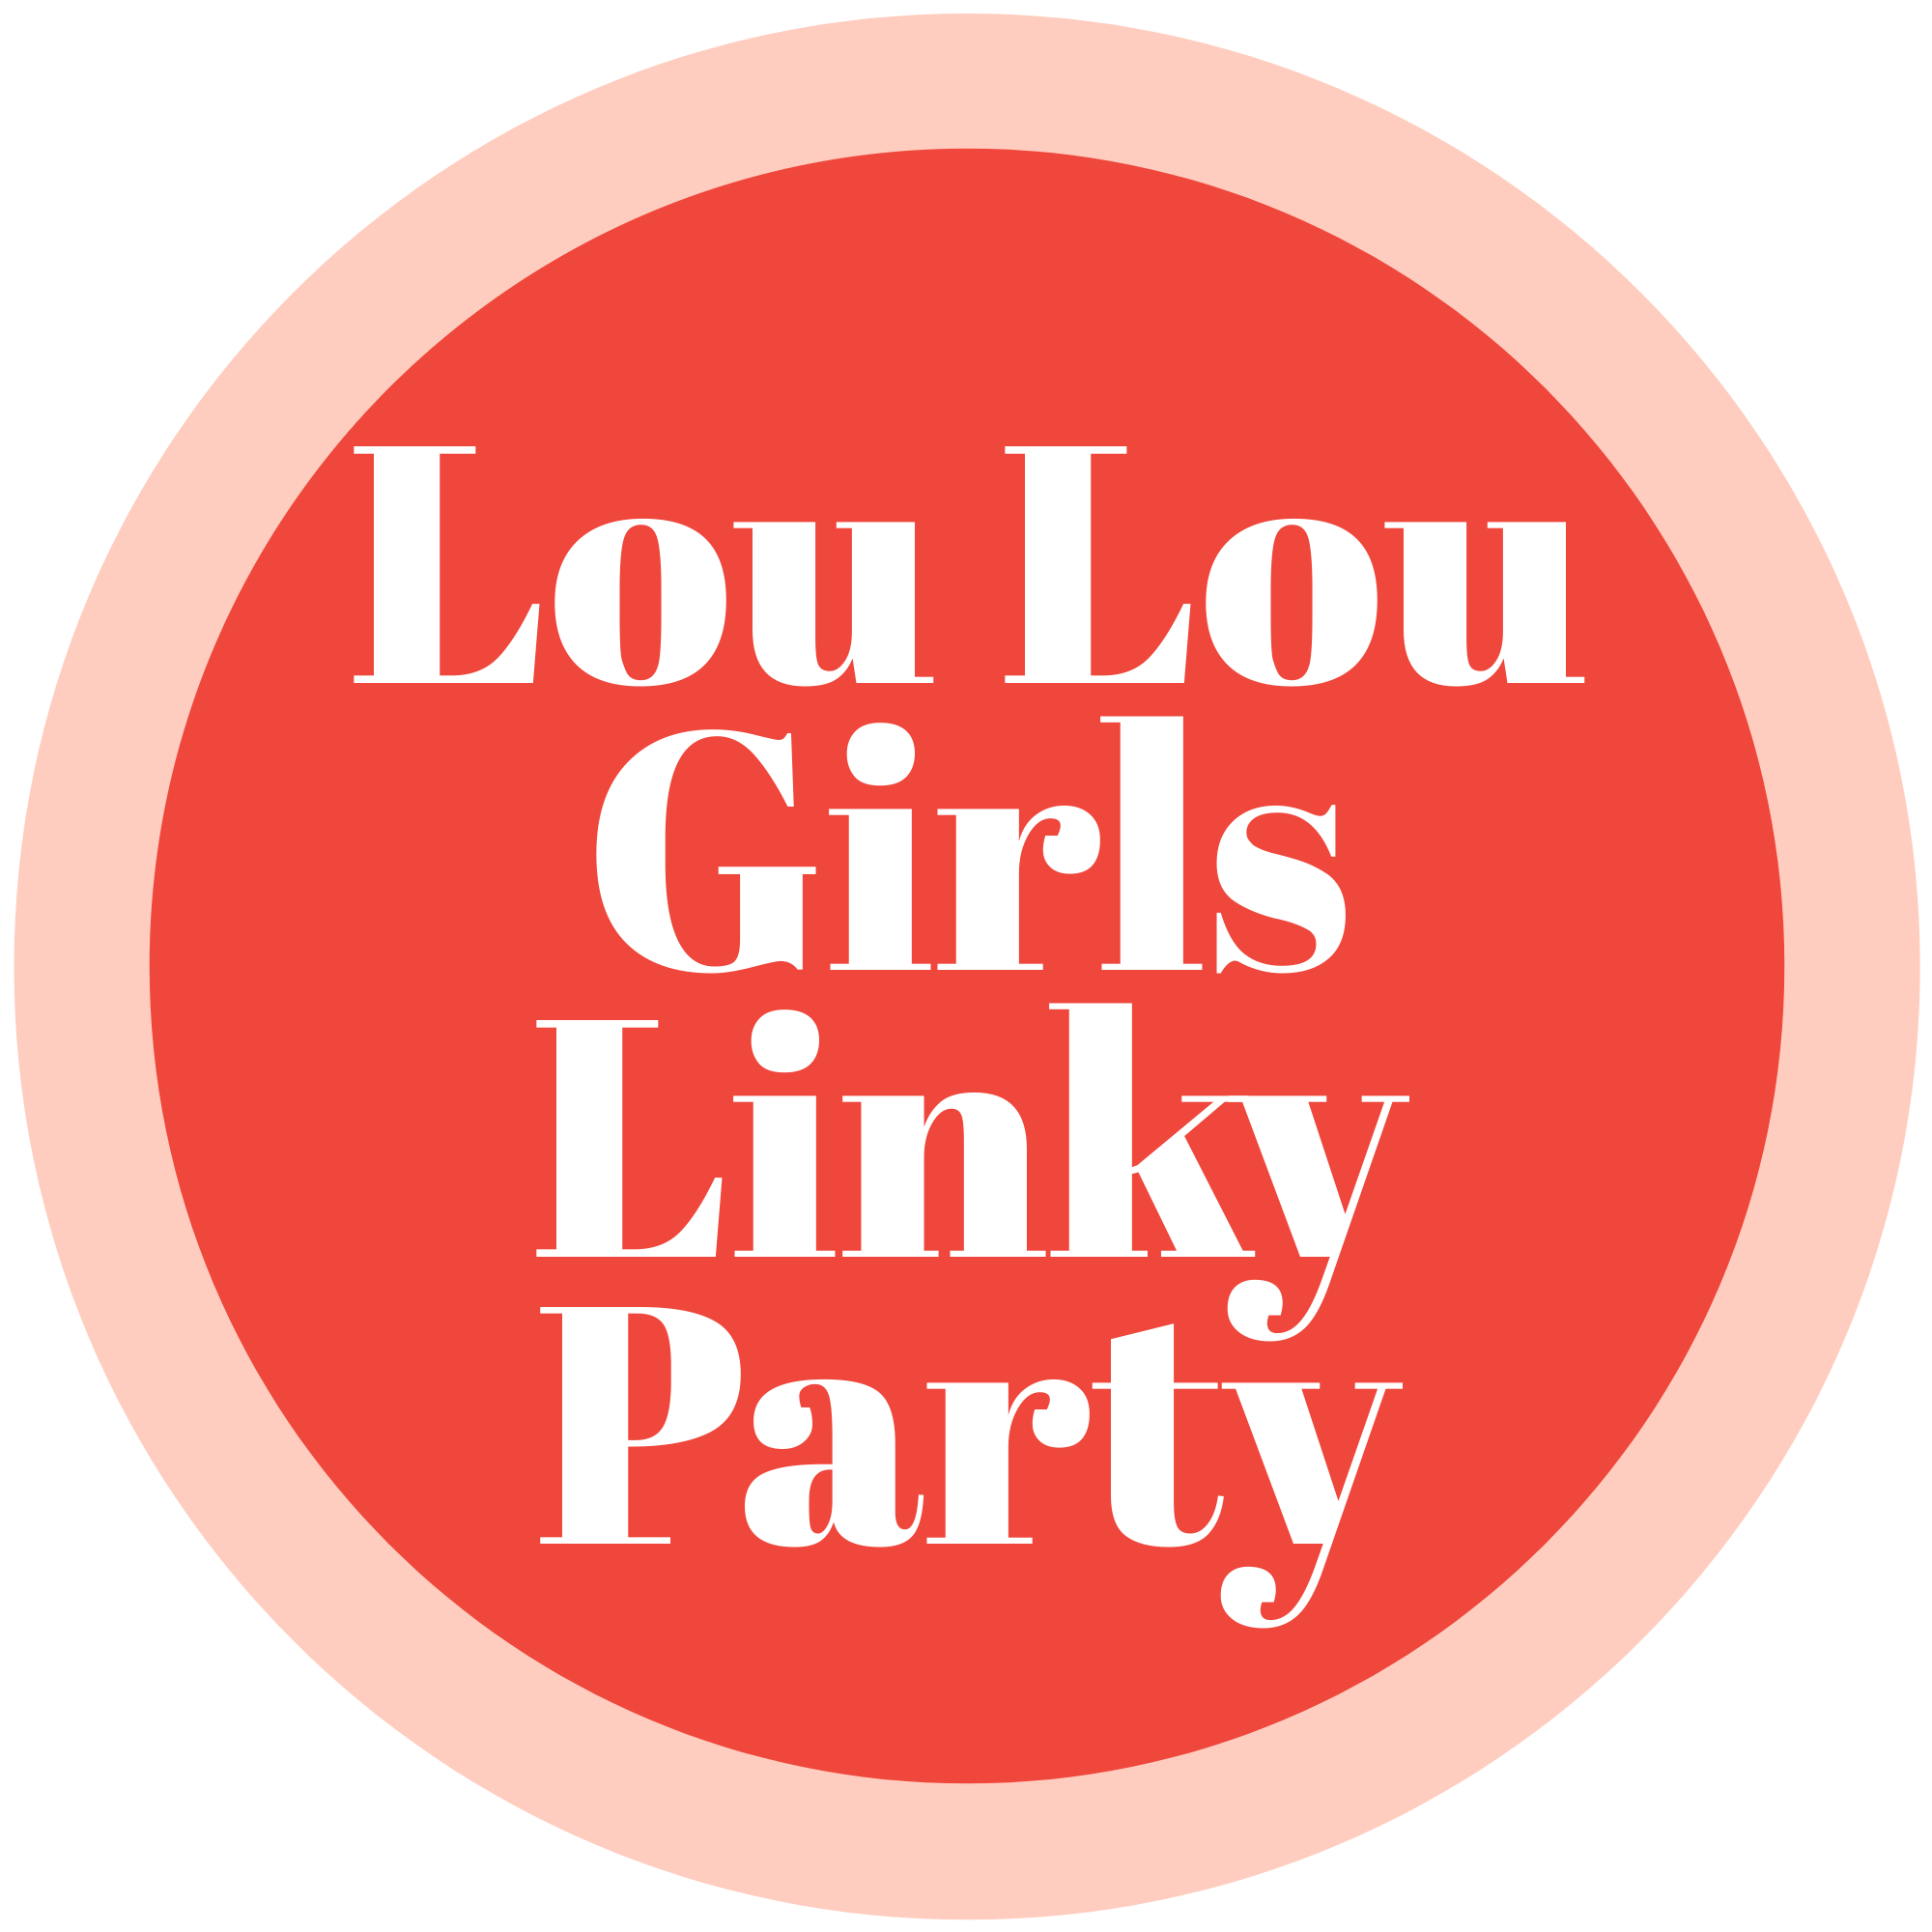 Lou Lou Girls Fabulous Party 484 #linkyparty #bloghop #linkyparties